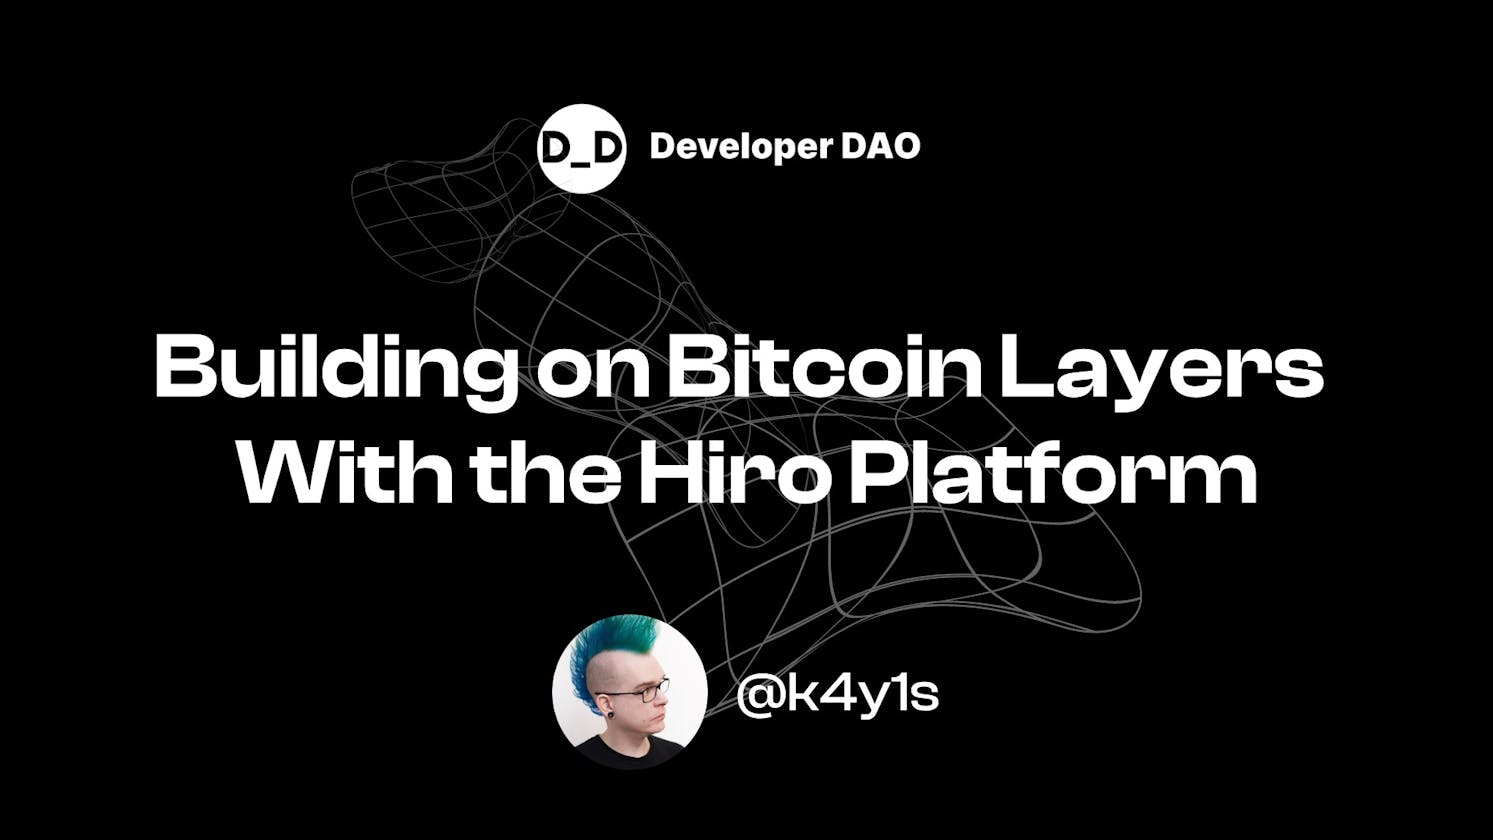 Building on Bitcoin Layers With the Hiro Platform